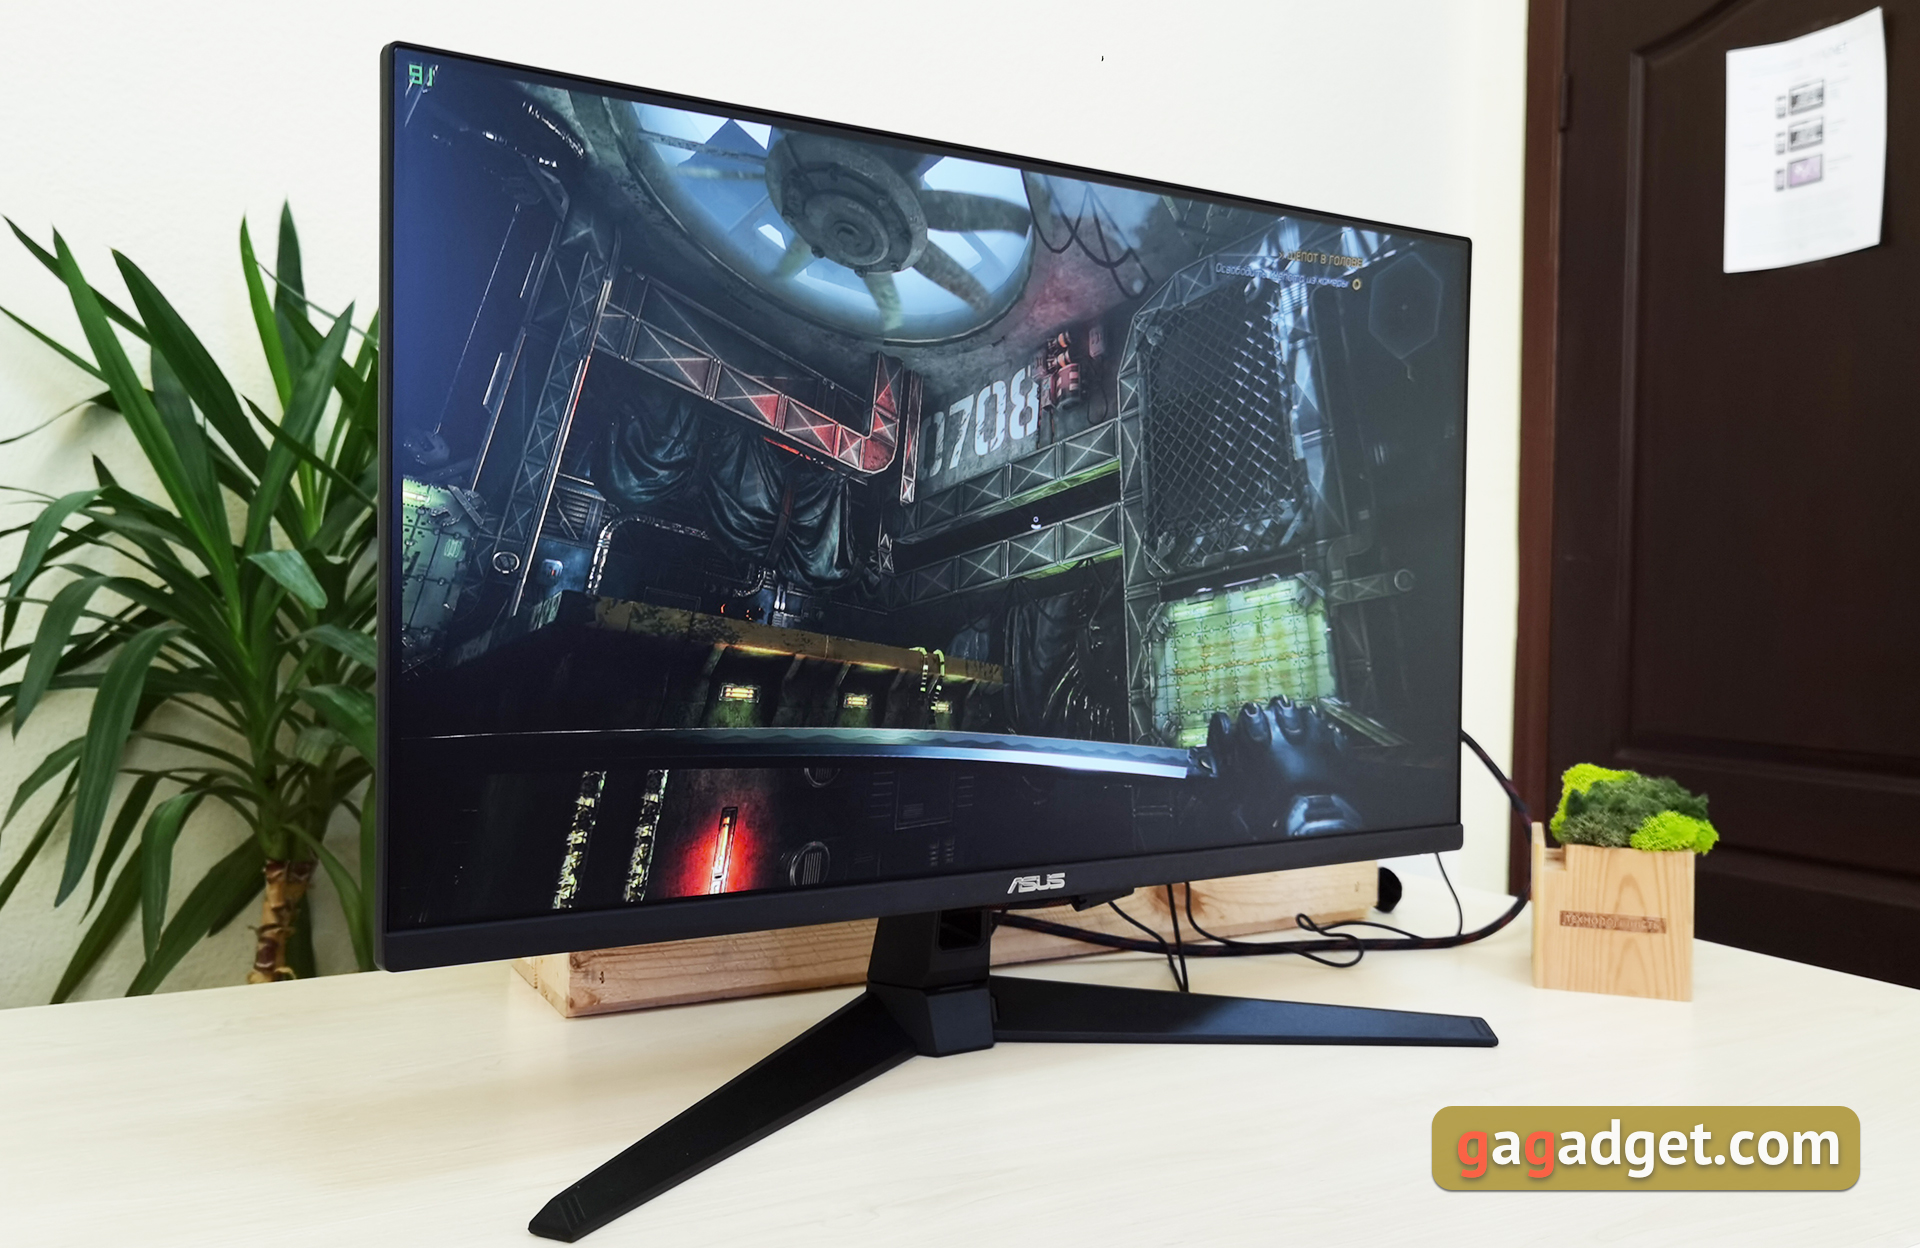 ASUS TUF Gaming VG279Q1A review: 27-inch gaming monitor with IPS panel and 165 Hz refresh rate-8